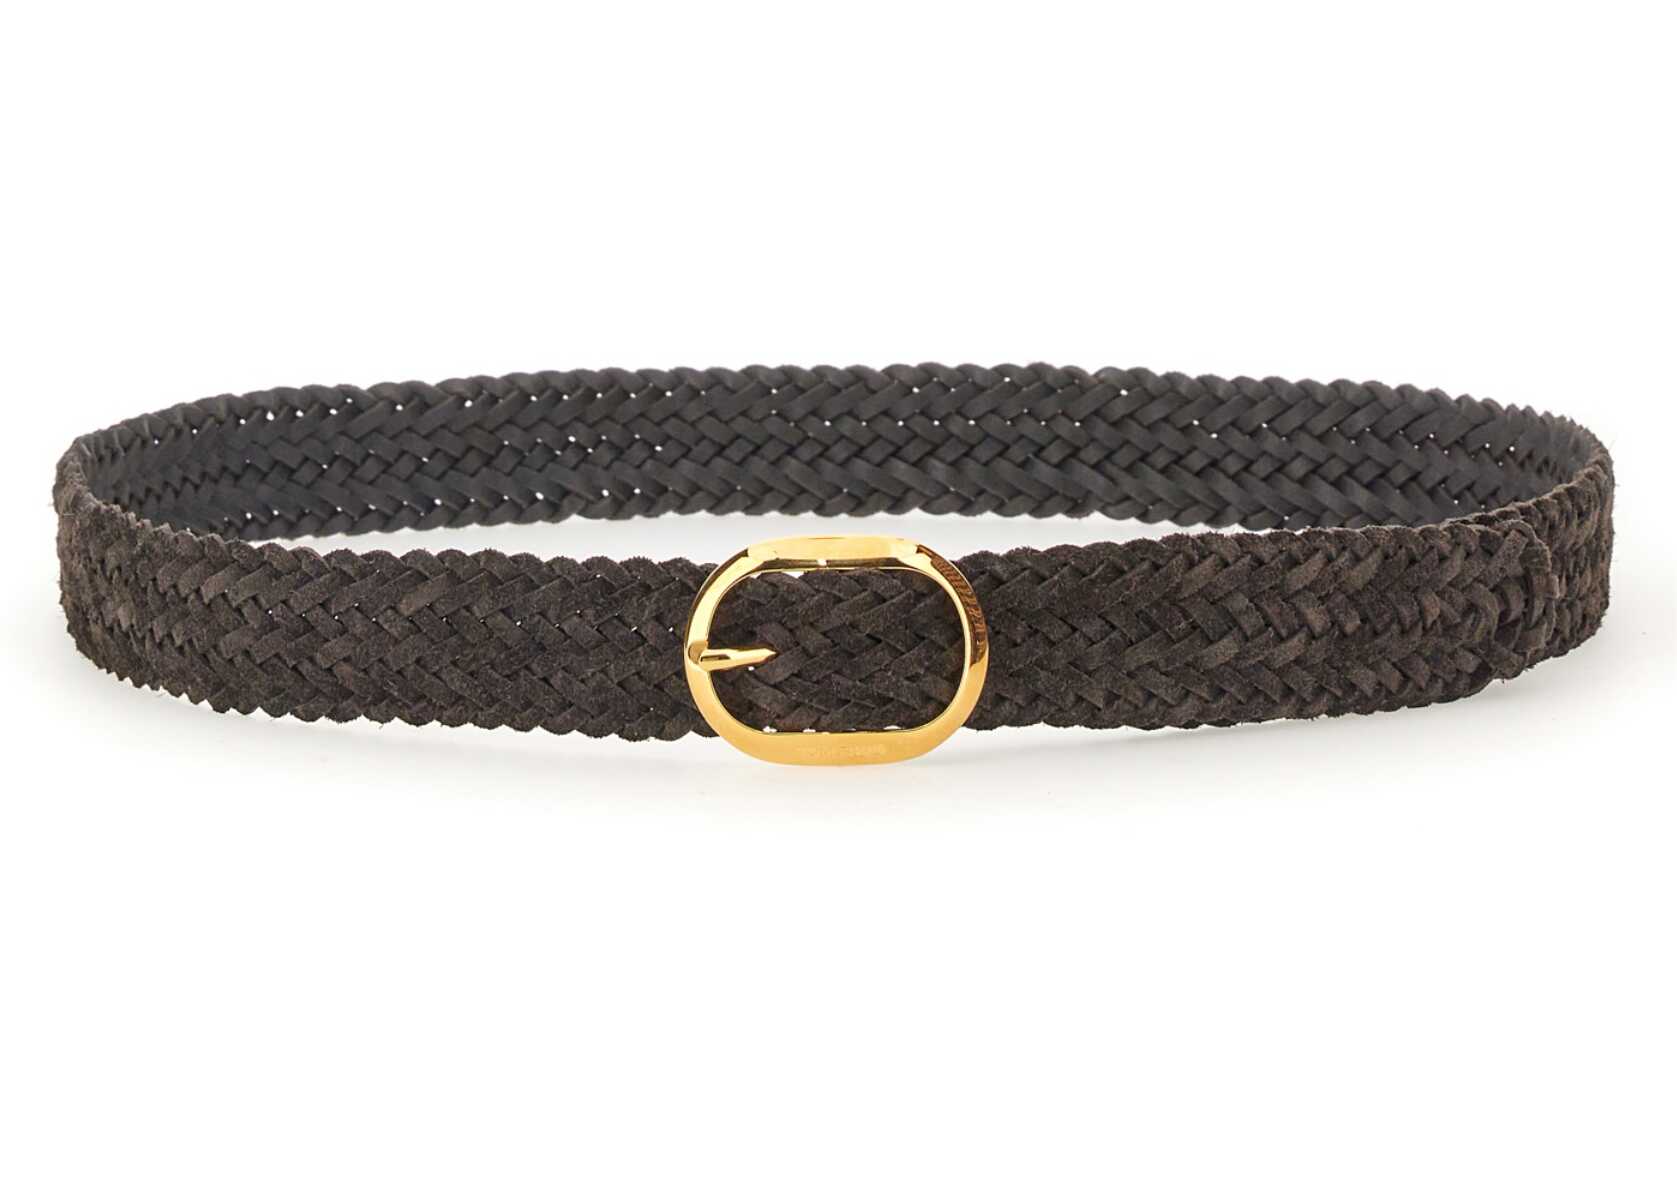 Tom Ford Woven Leather Belt BROWN